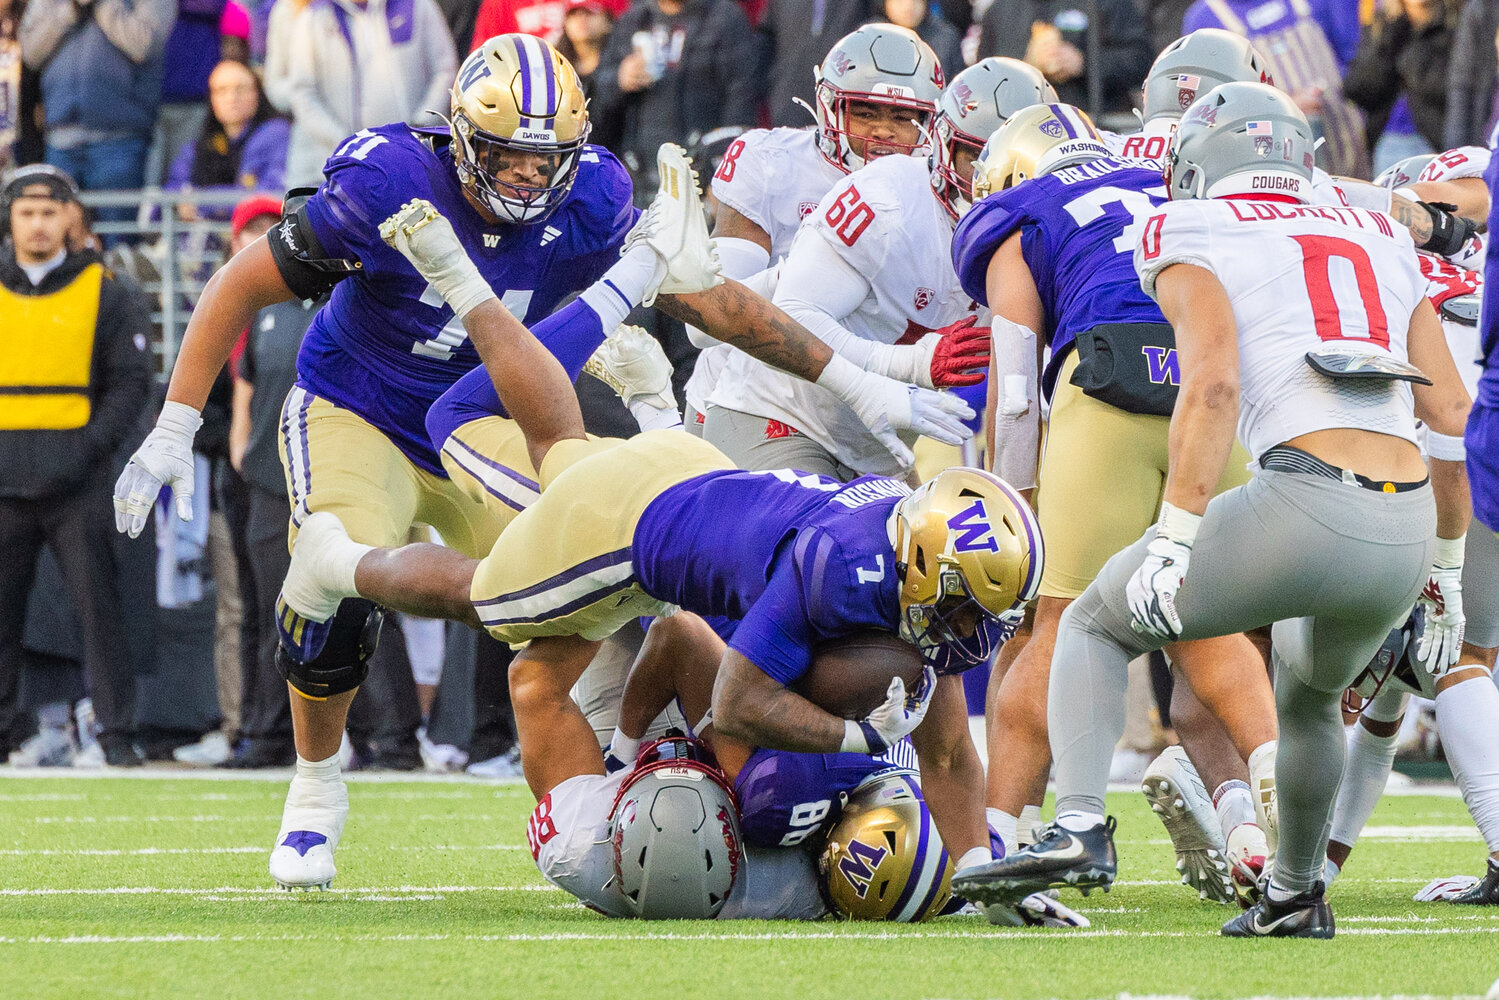 Huskies running back Dillon Johnson (7) looks fro extra yards as he is brought down by Cougars defender Brennan Jackson (80) during the Boeing Apple Cup Series football game in Seattle against the Washington State University Cougars on Saturday, Nov. 25.